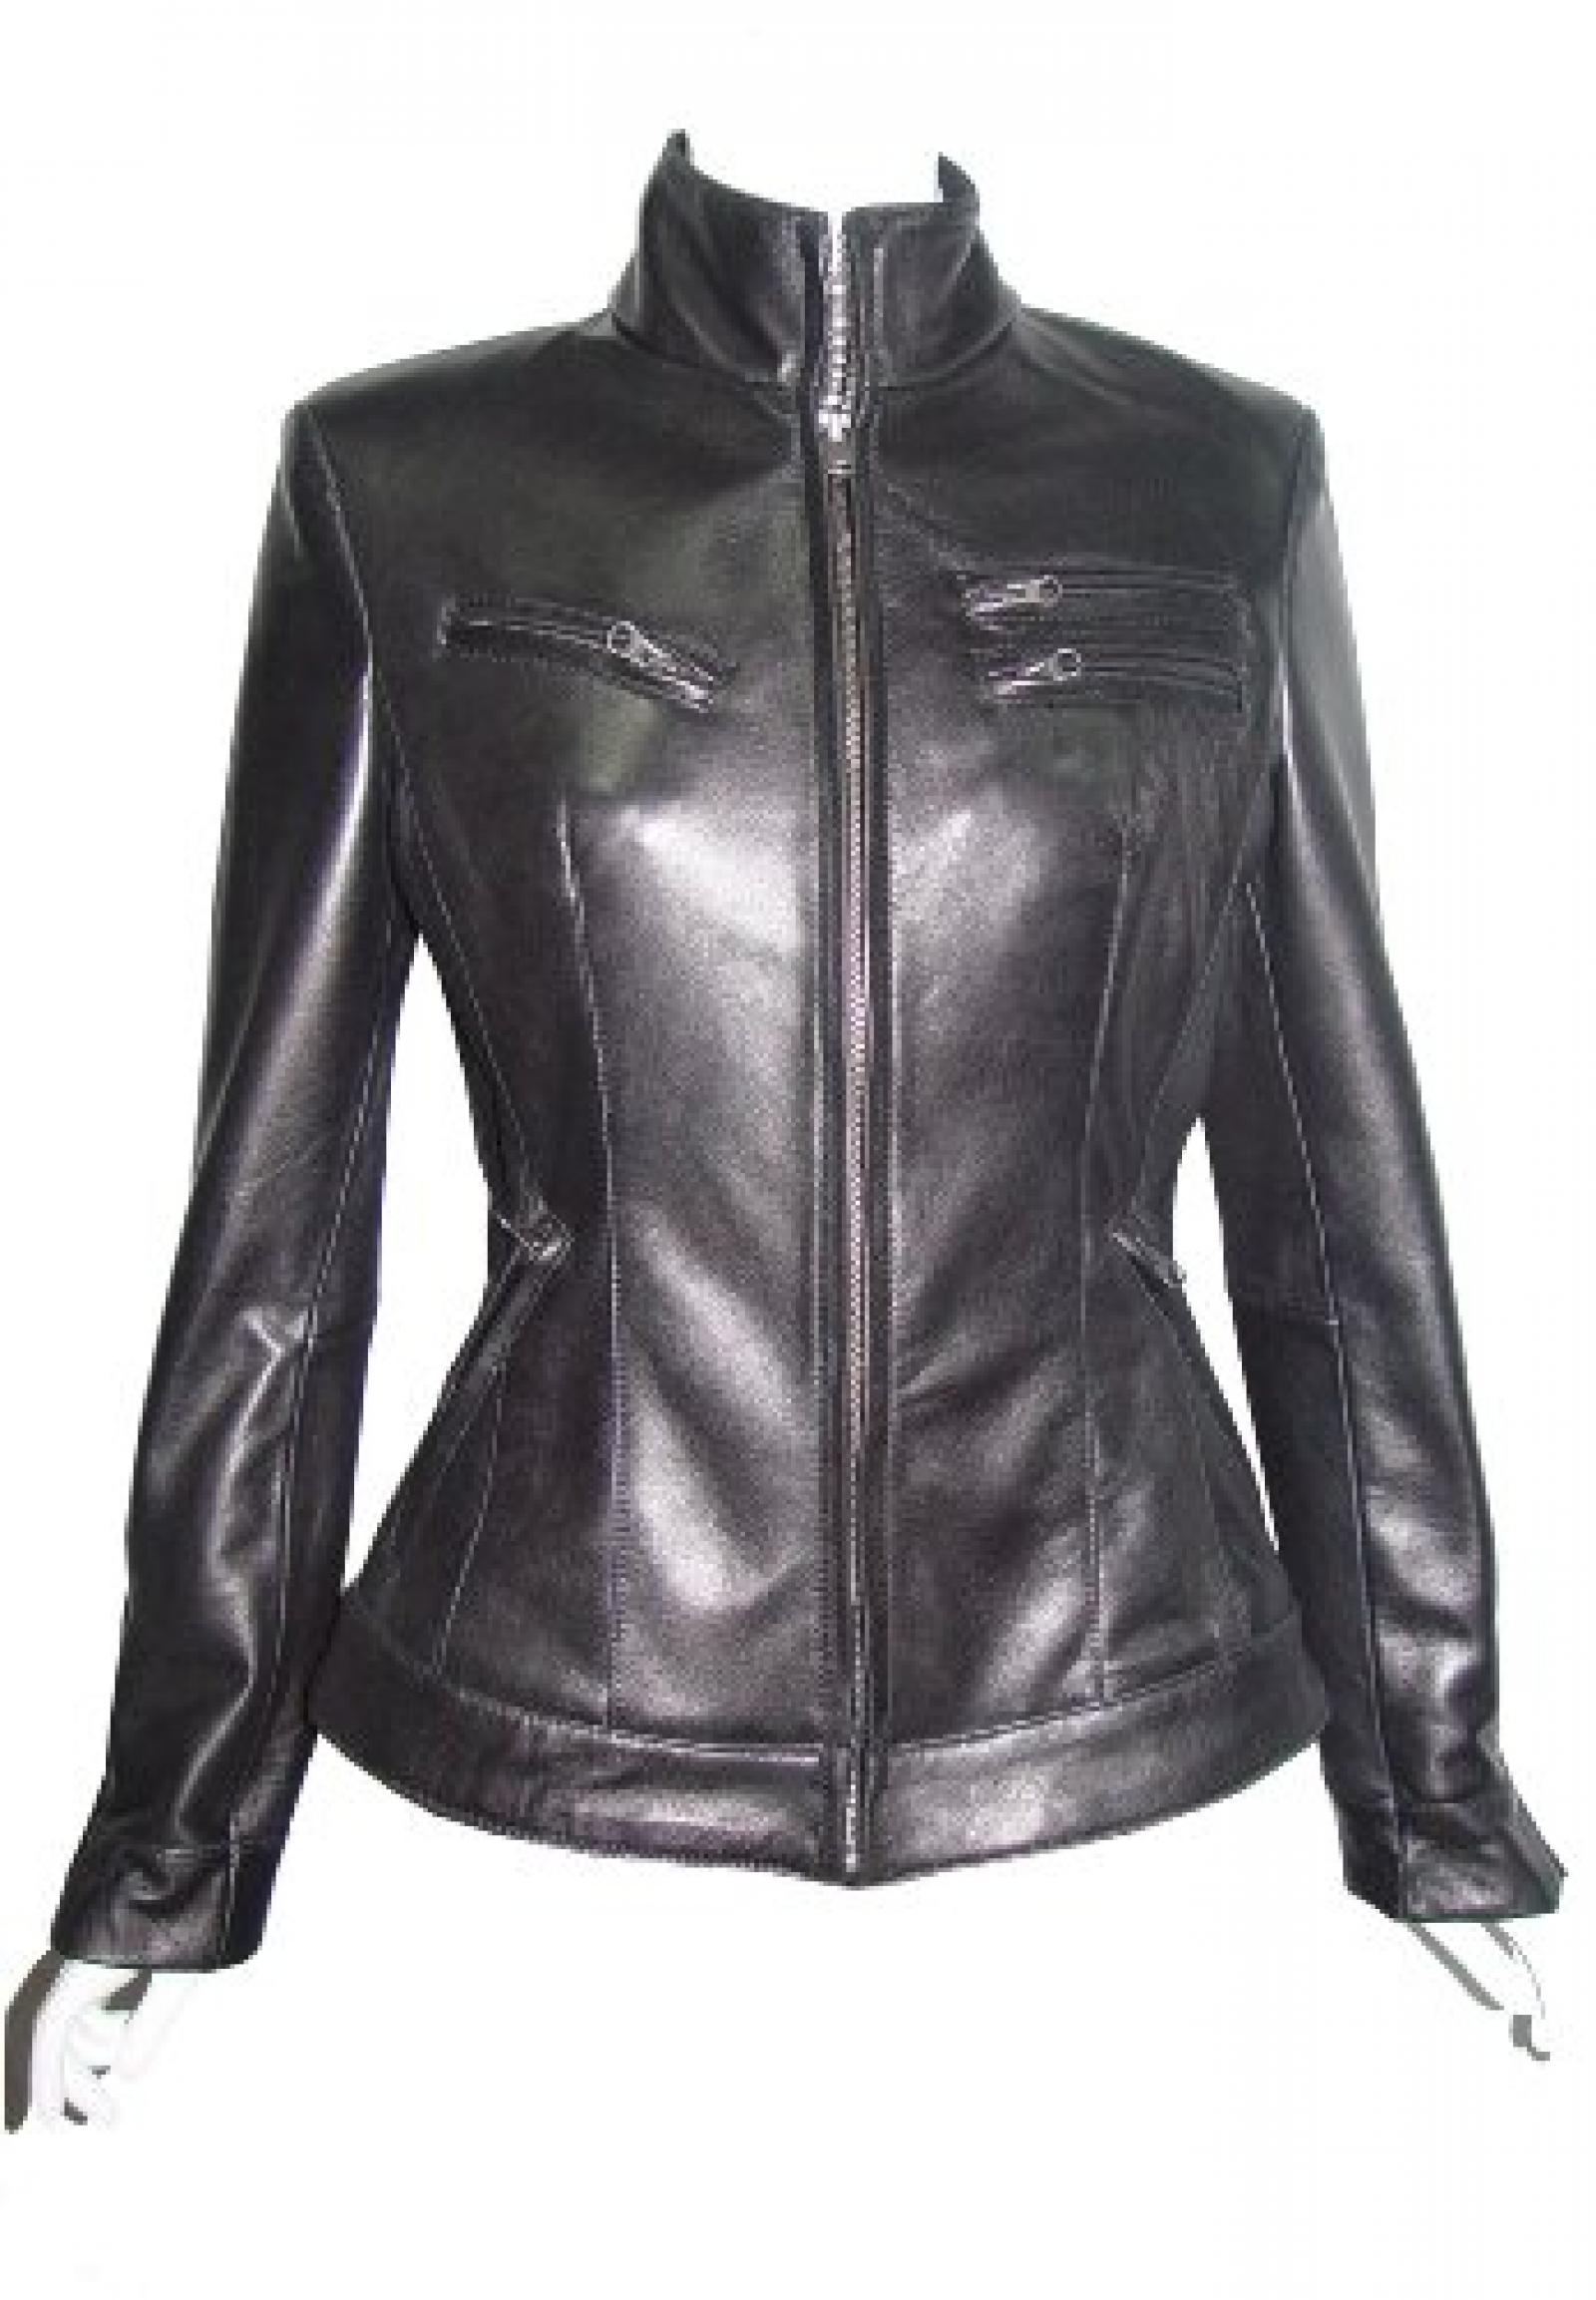 Nettailor Women 4199 Soft Leather New Casual Rider Jacket Zip Front China Collar 